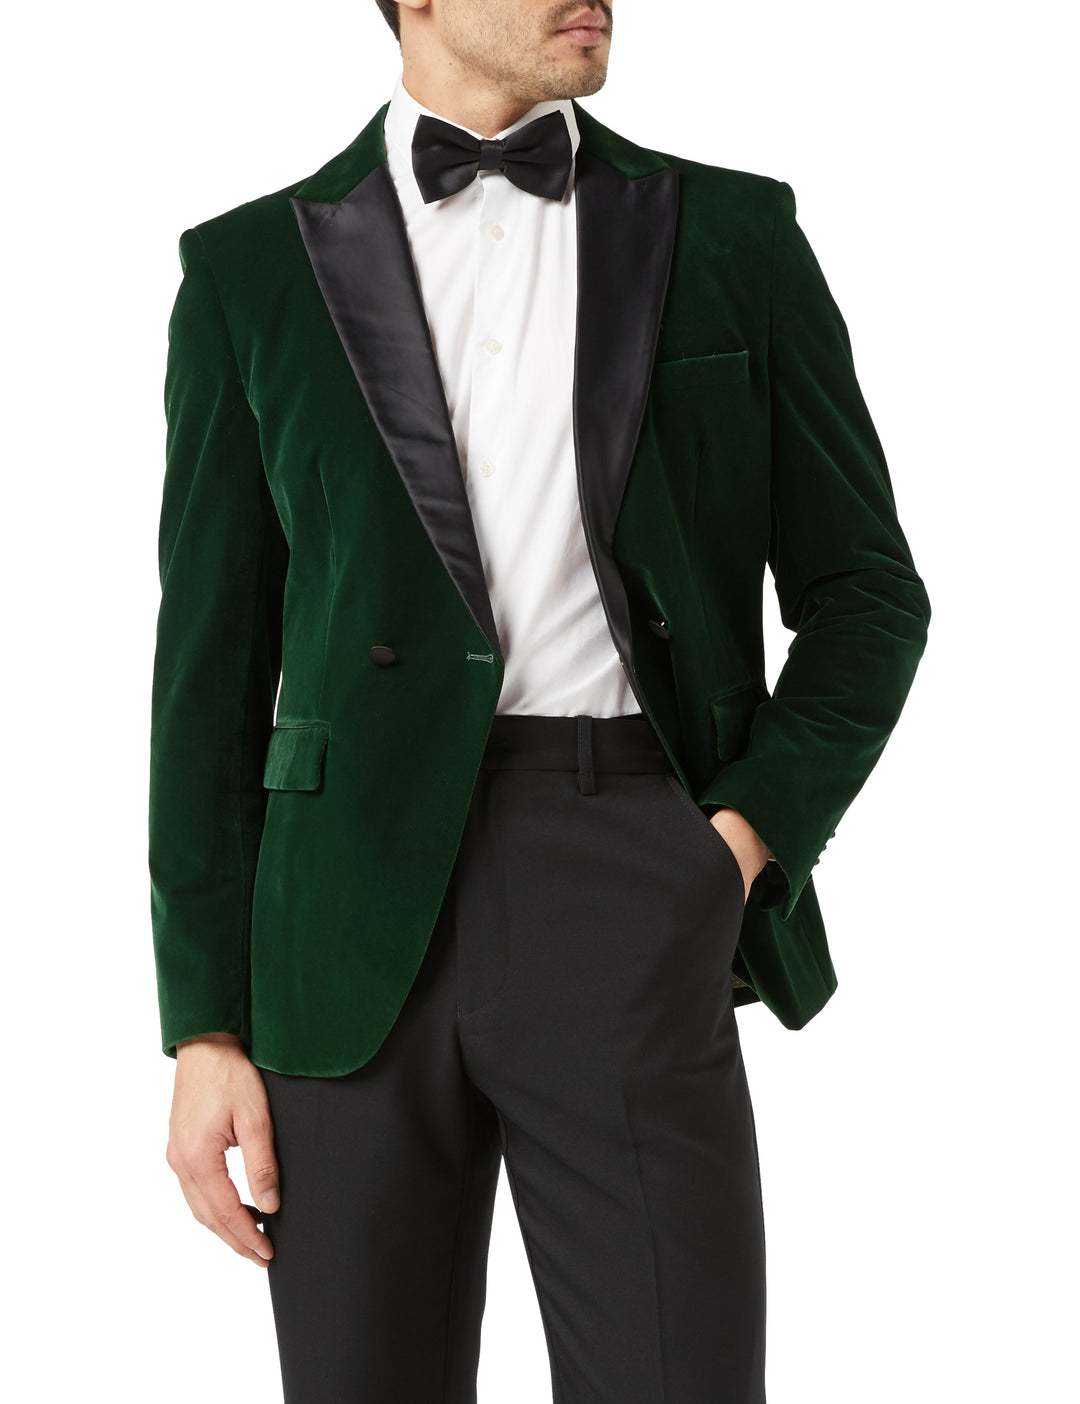 Mens Velvet Clothing and Outfits | XPOSED